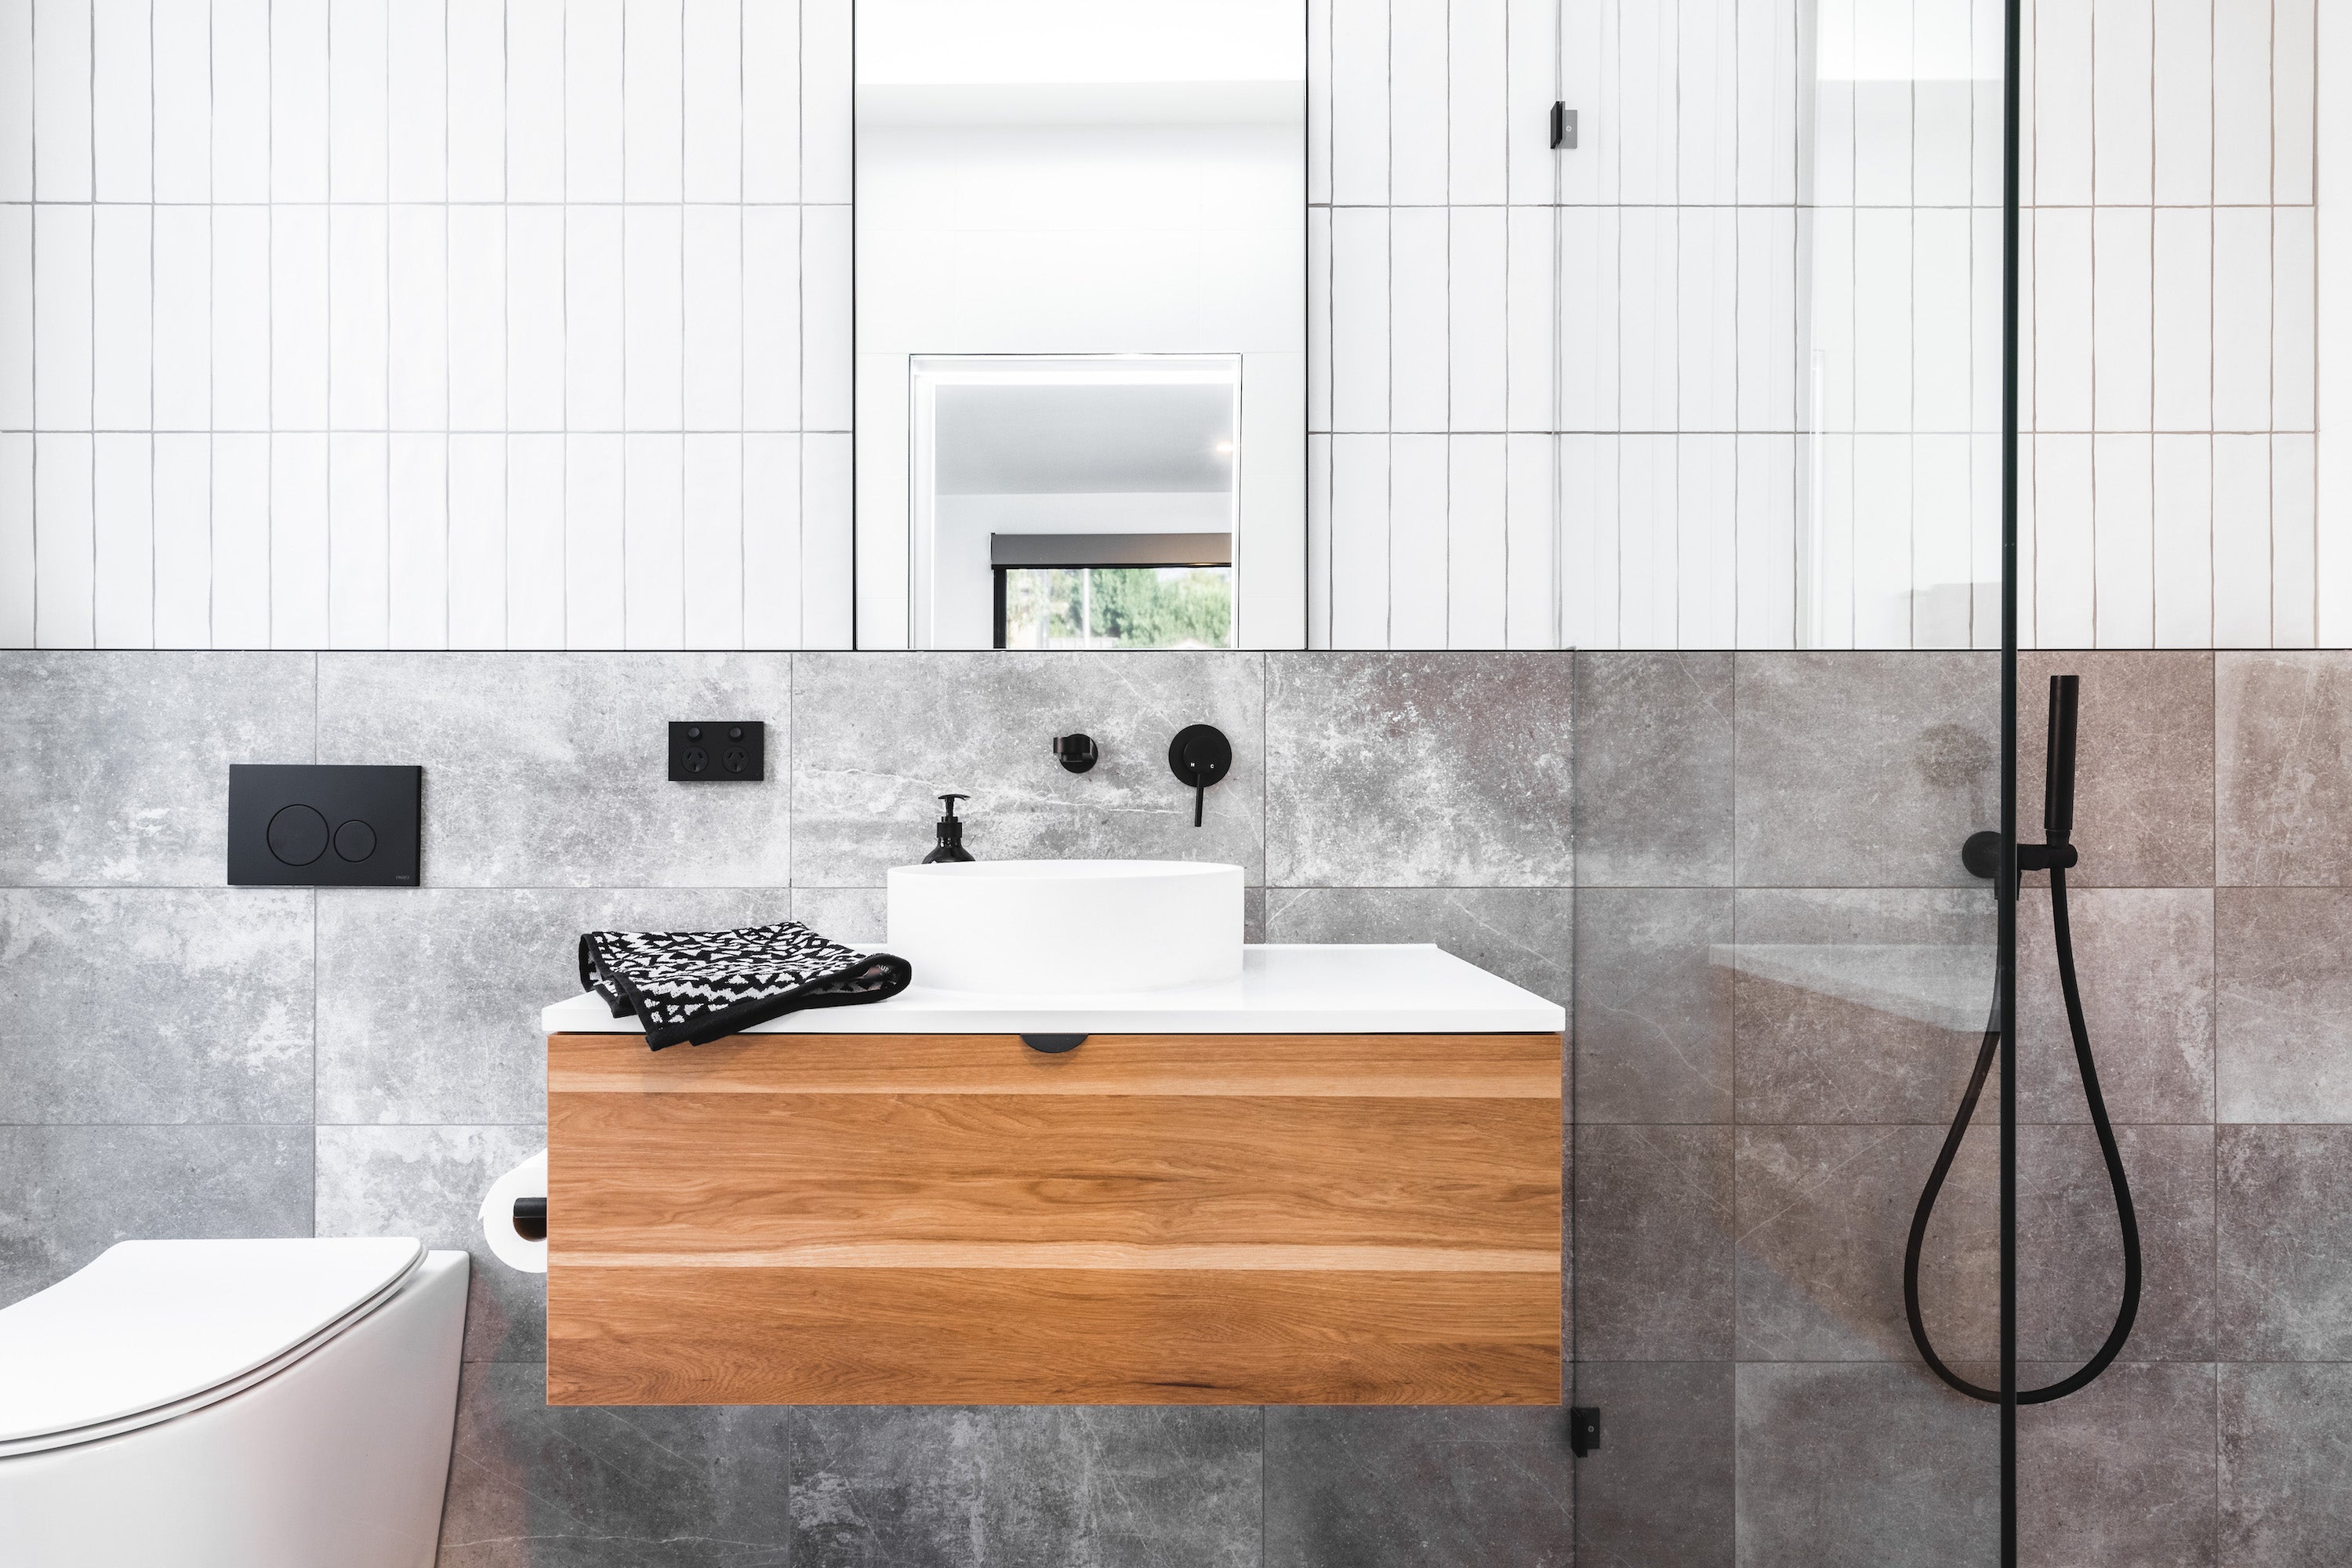 How to Choose the Best Pop Up Basin Waste for Your Bathroom?